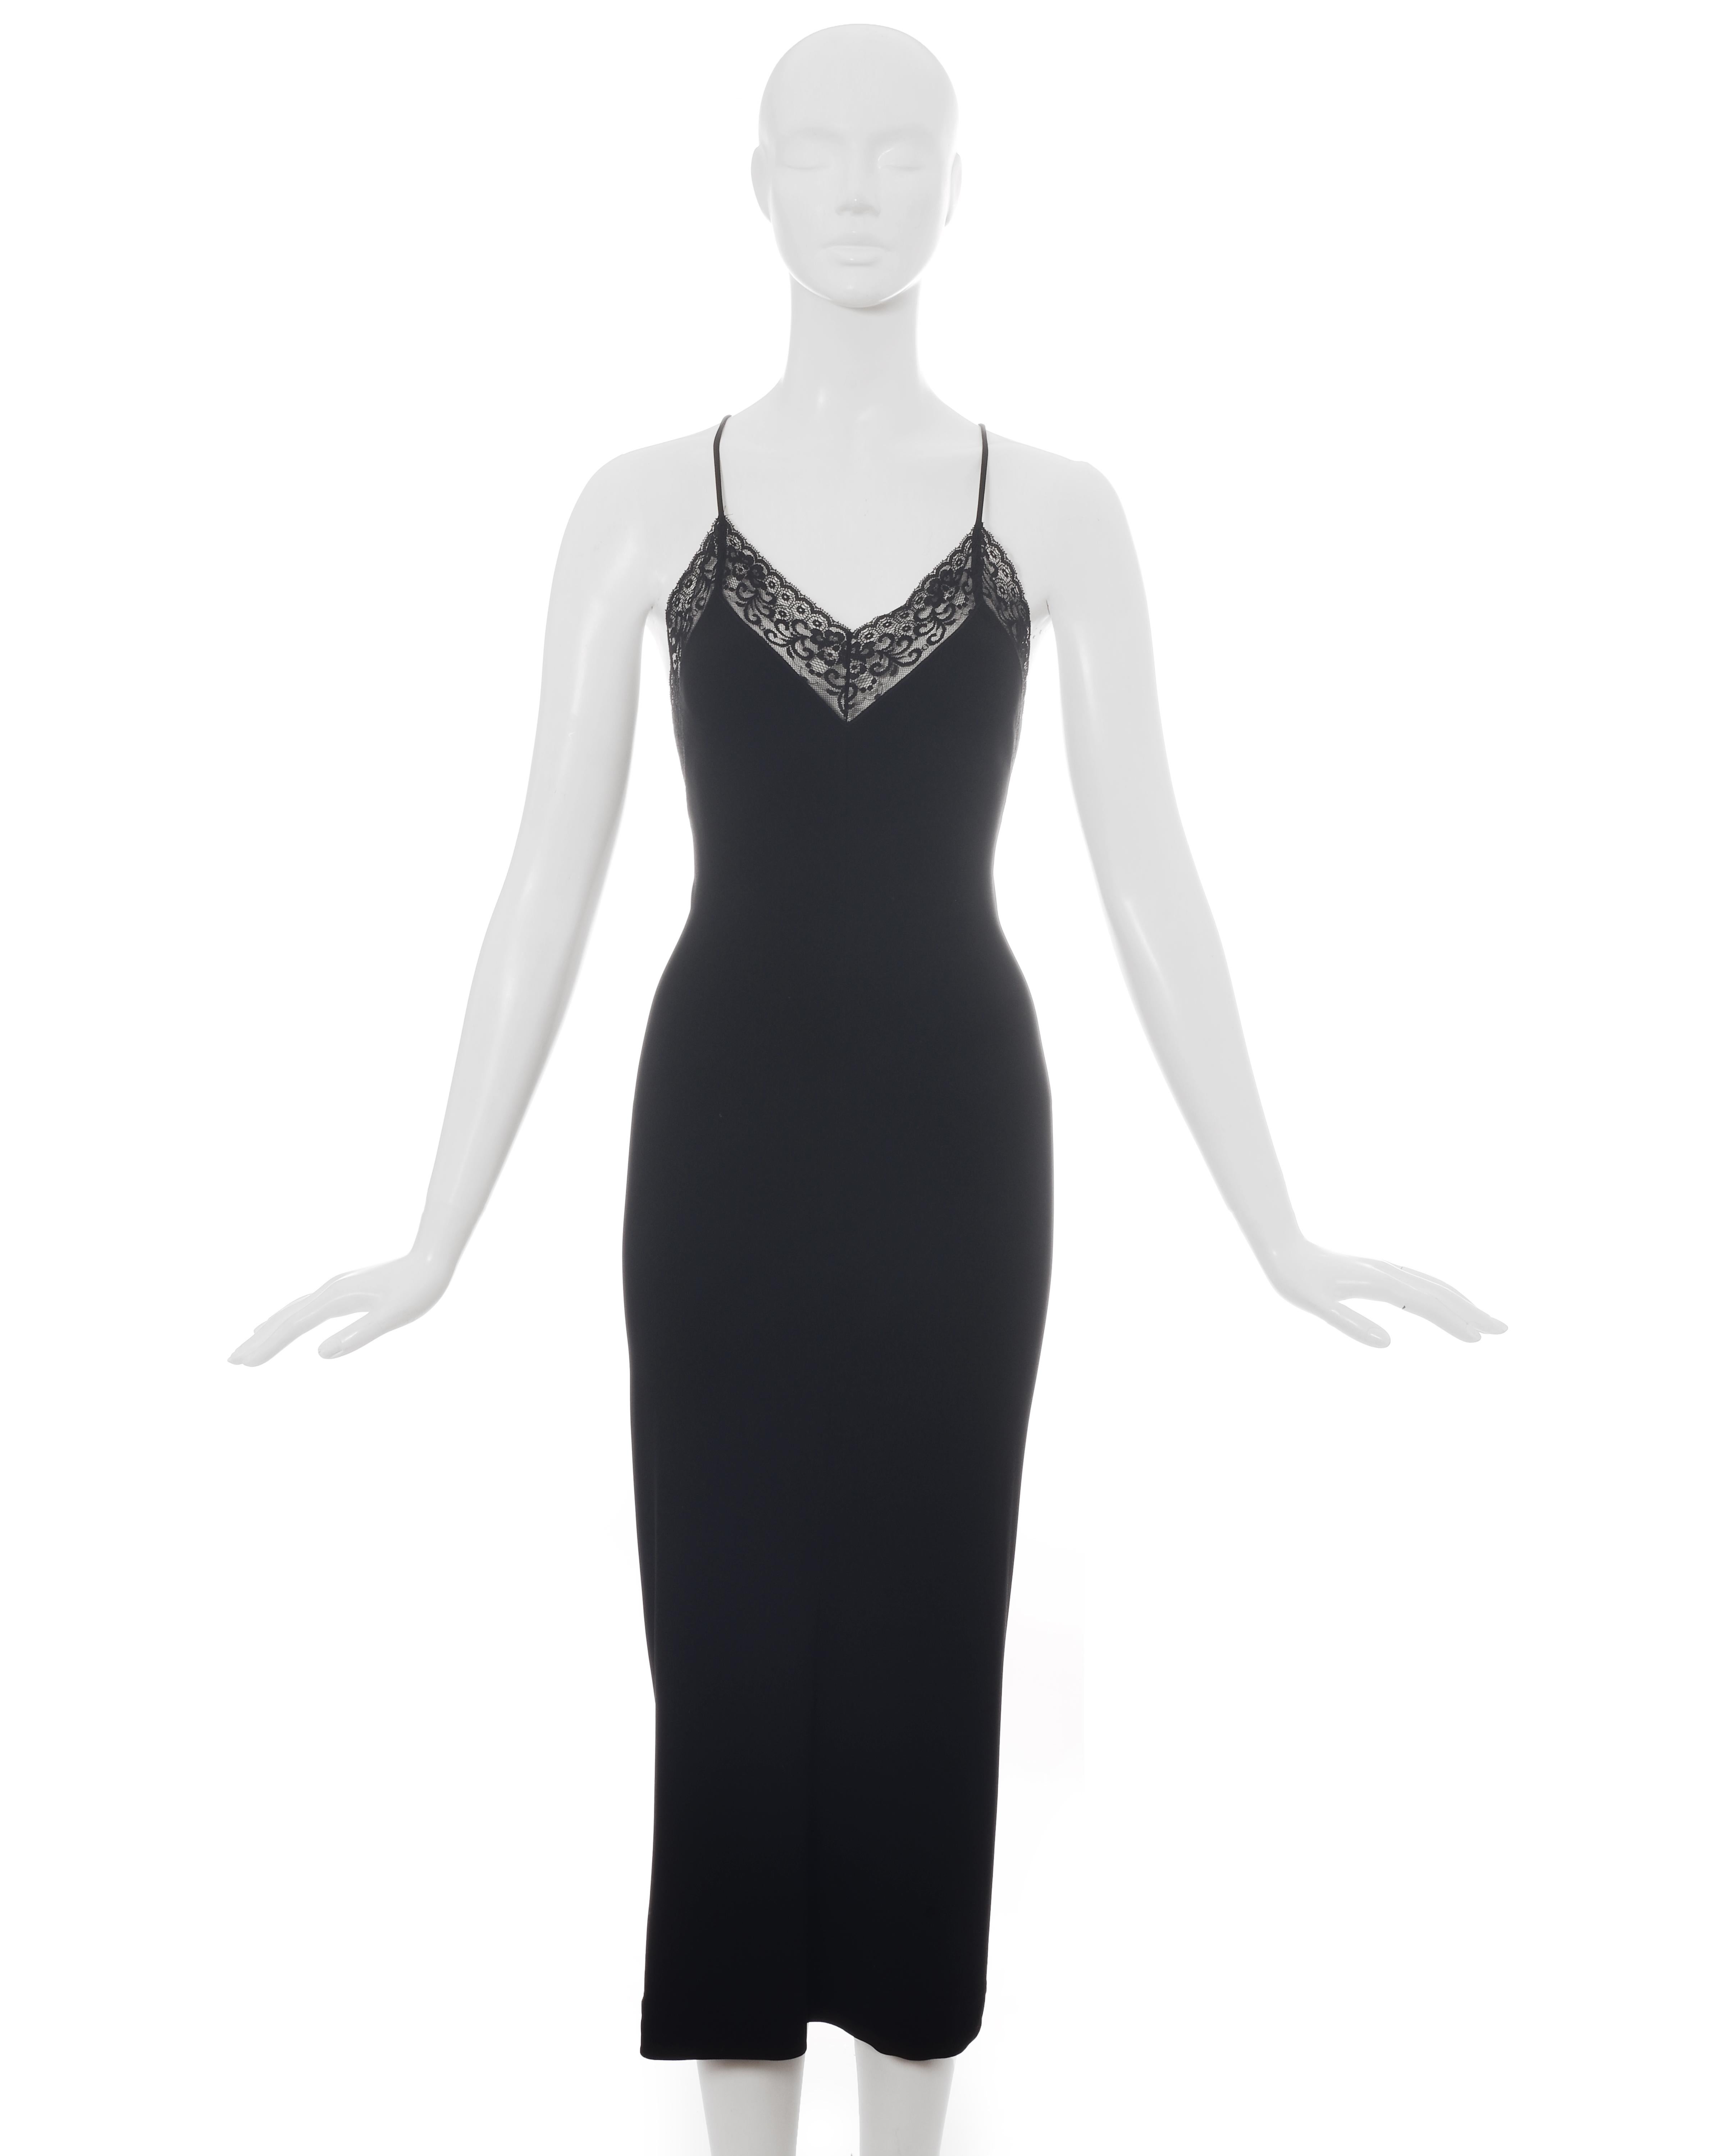 Dolce & Gabbana black rayon figure hugging mid-length low back evening dress with lace trim and criss-cross spaghetti straps.

c. 1996-1999